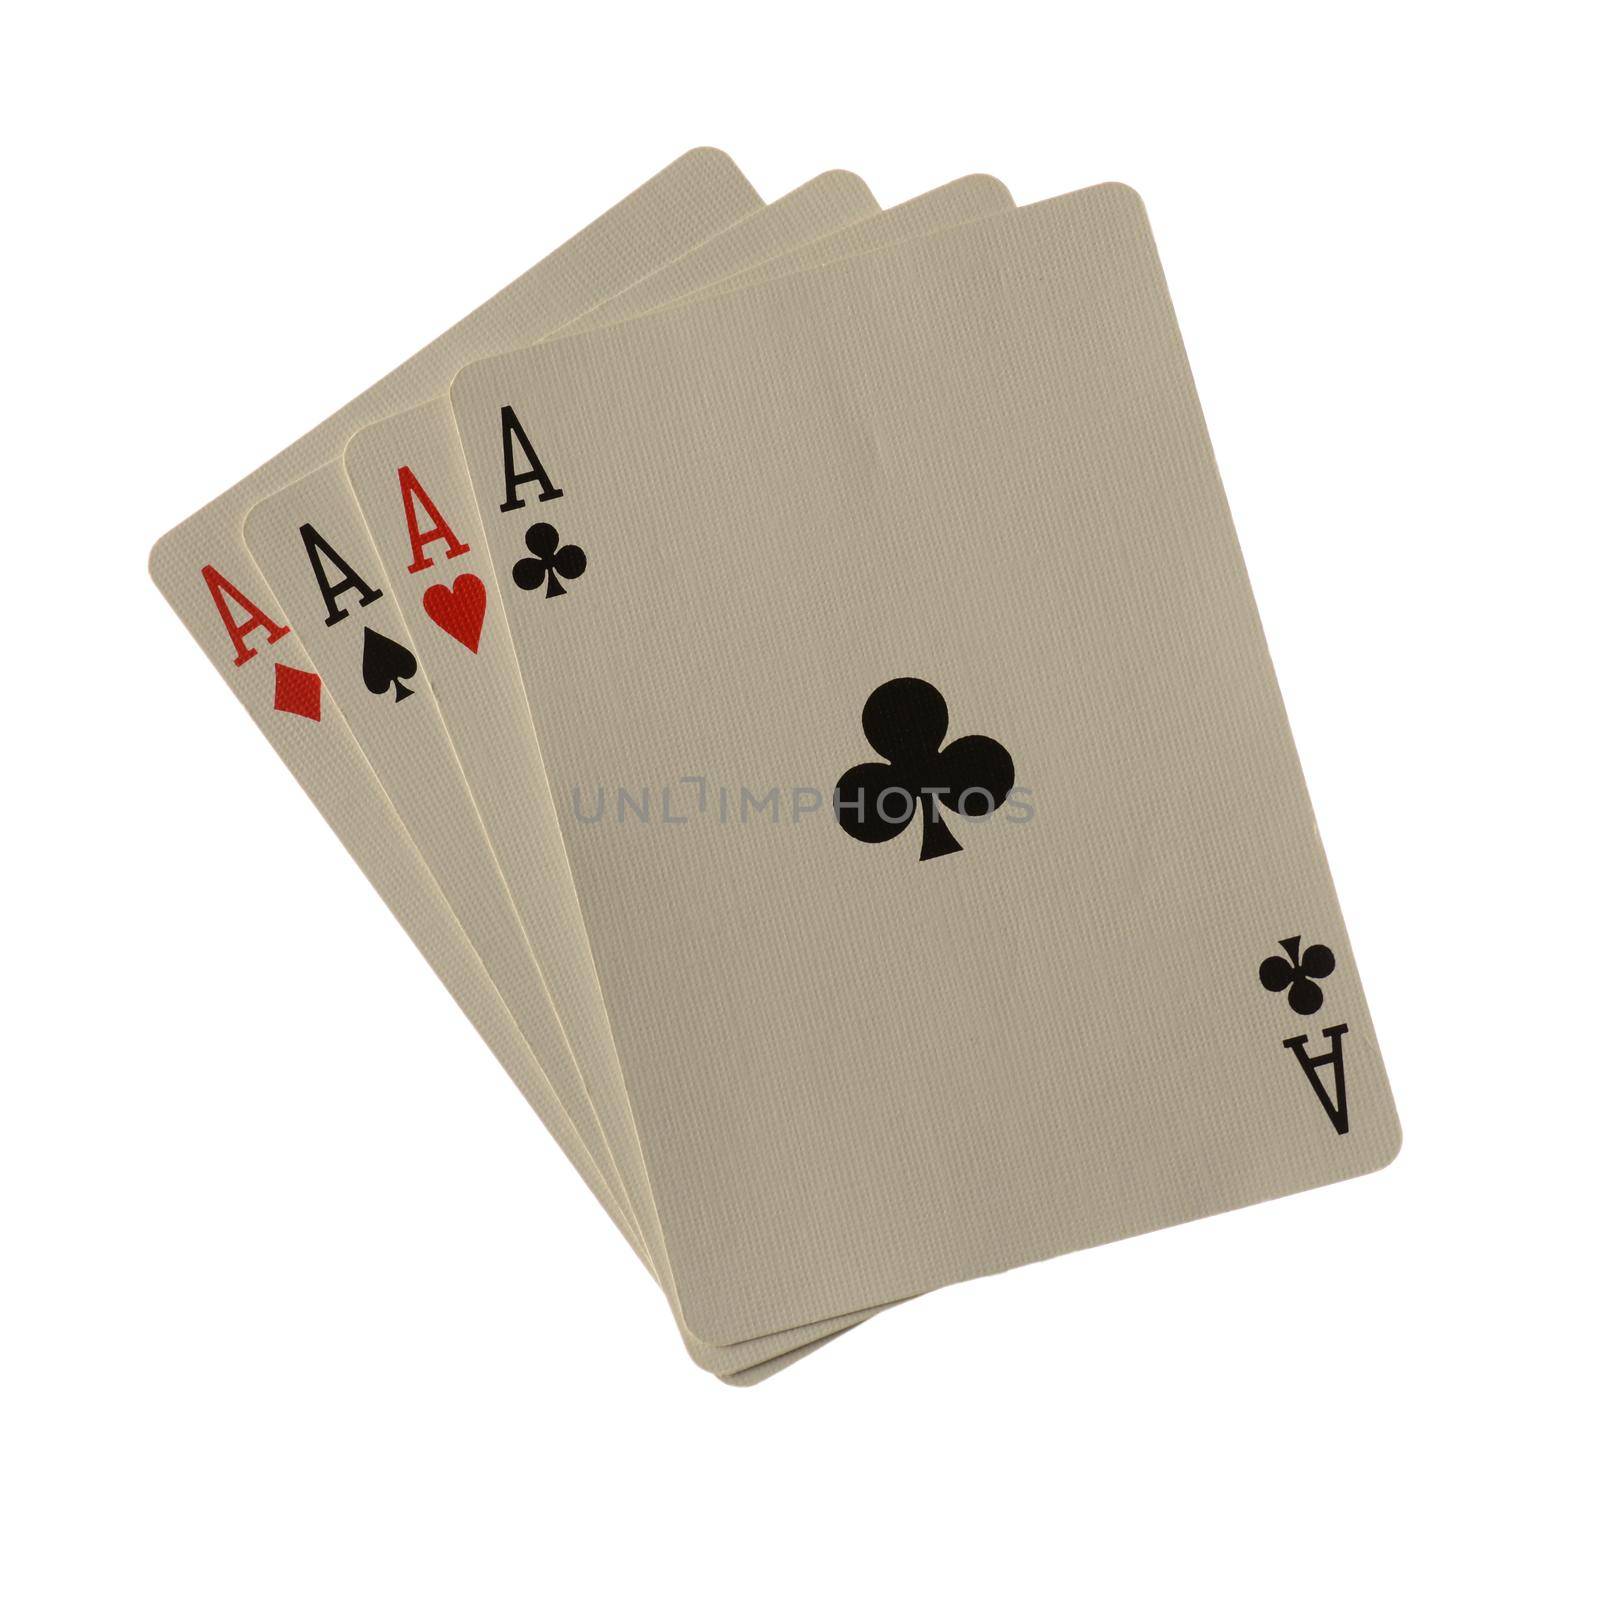 An isolated over white background image of a poker hand made of four aces.